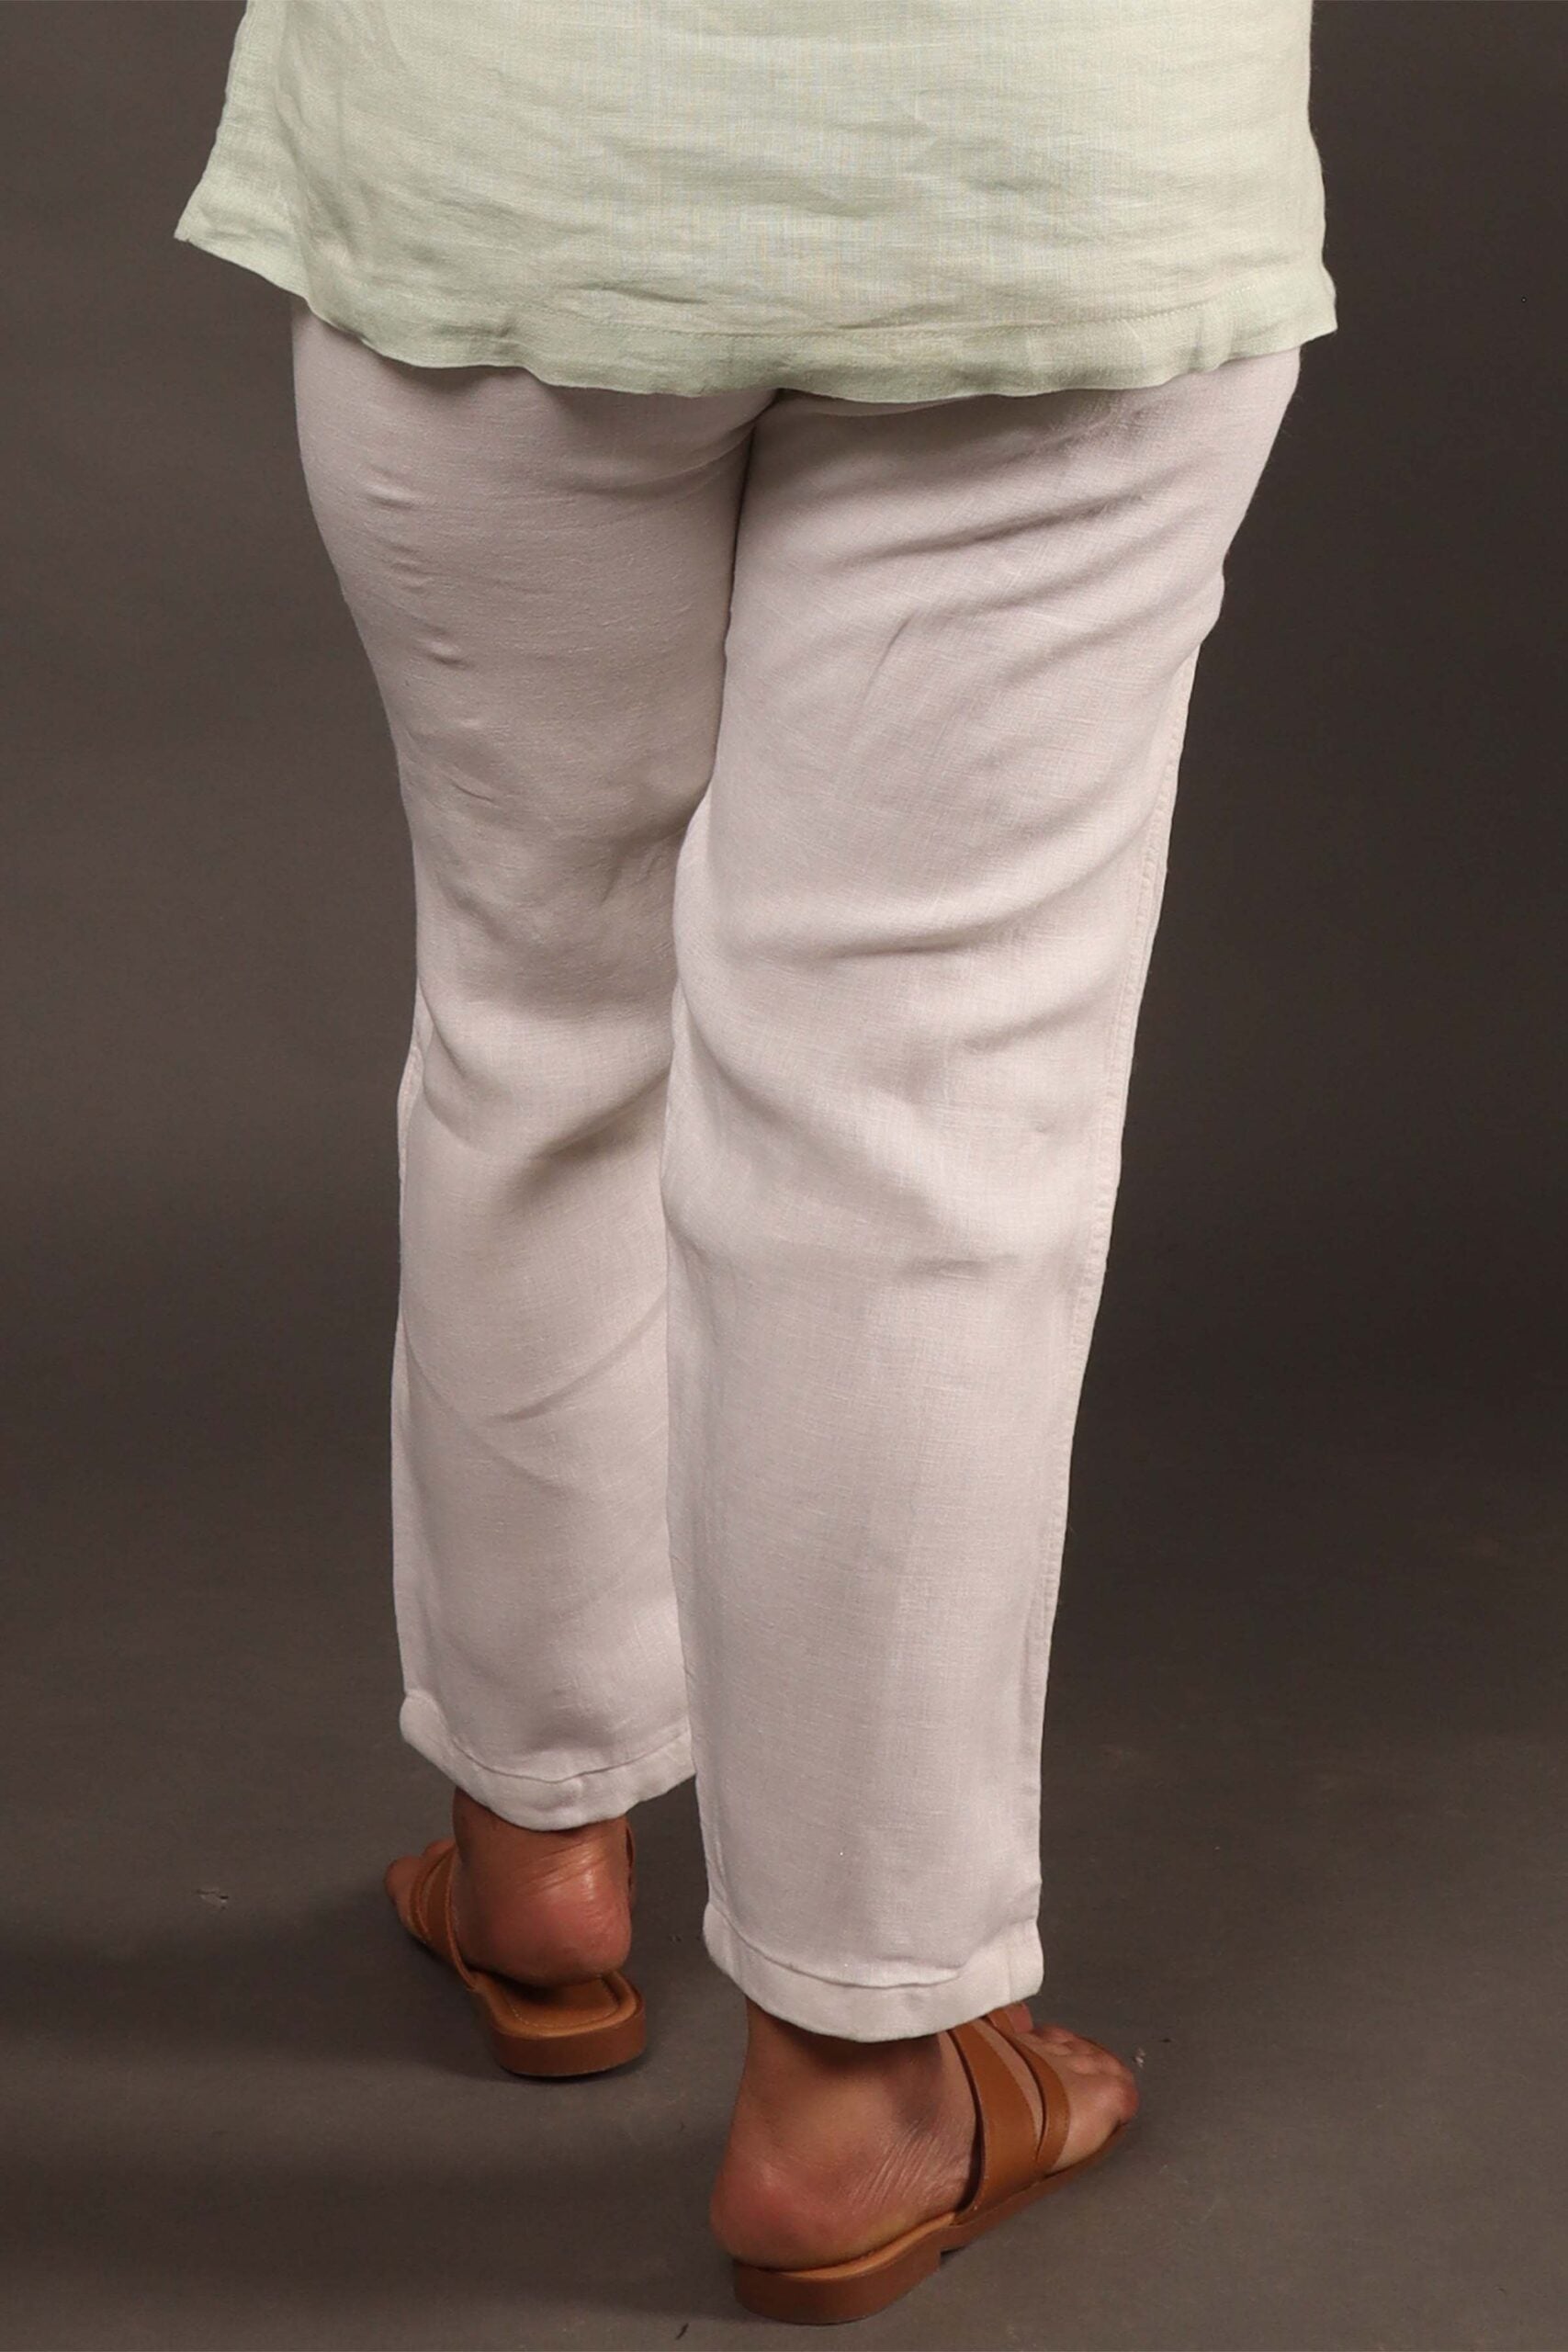 White Tapered Pants